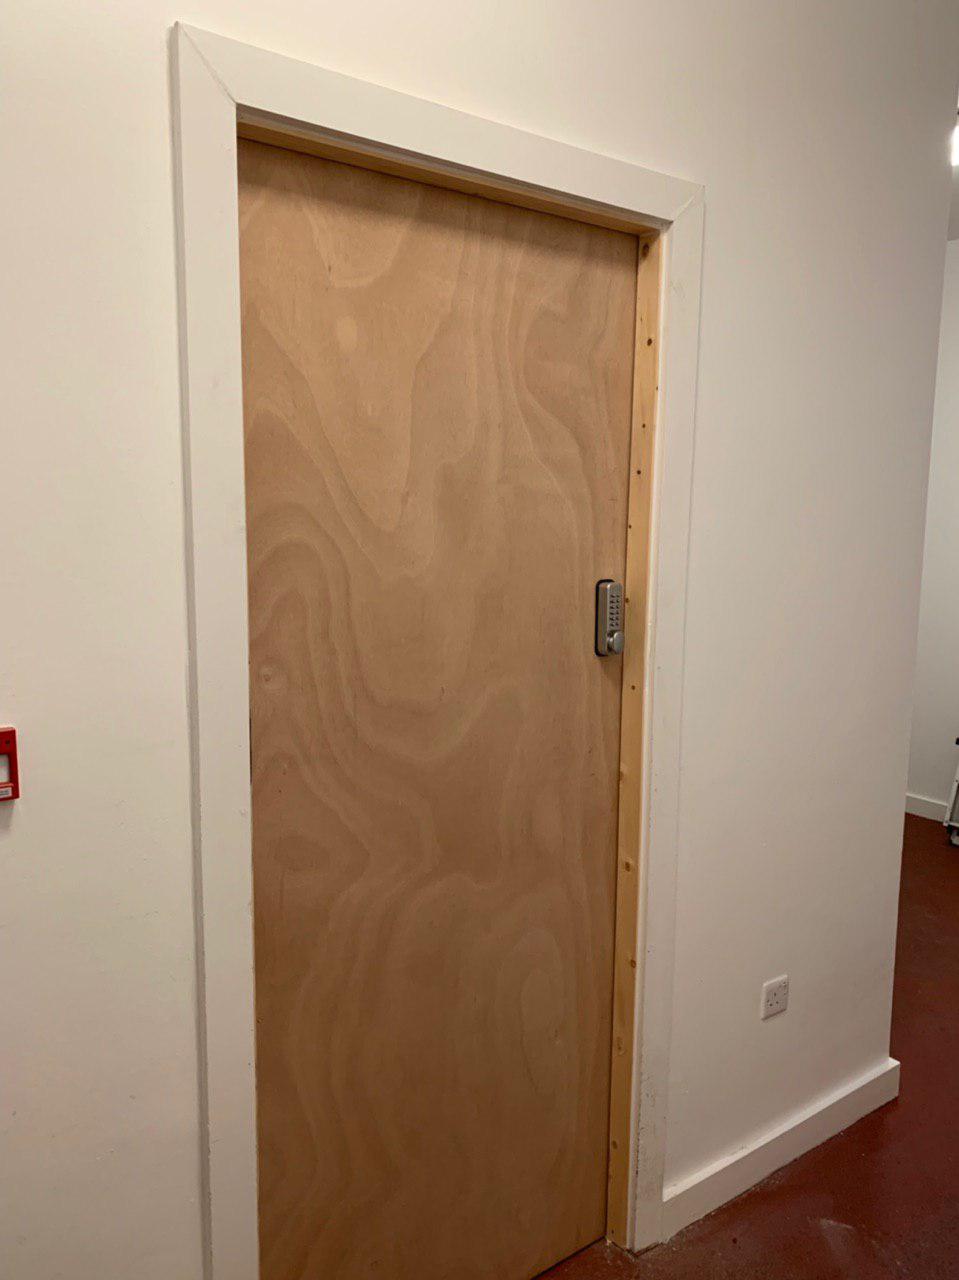 New fire door & frame installed and painted 2